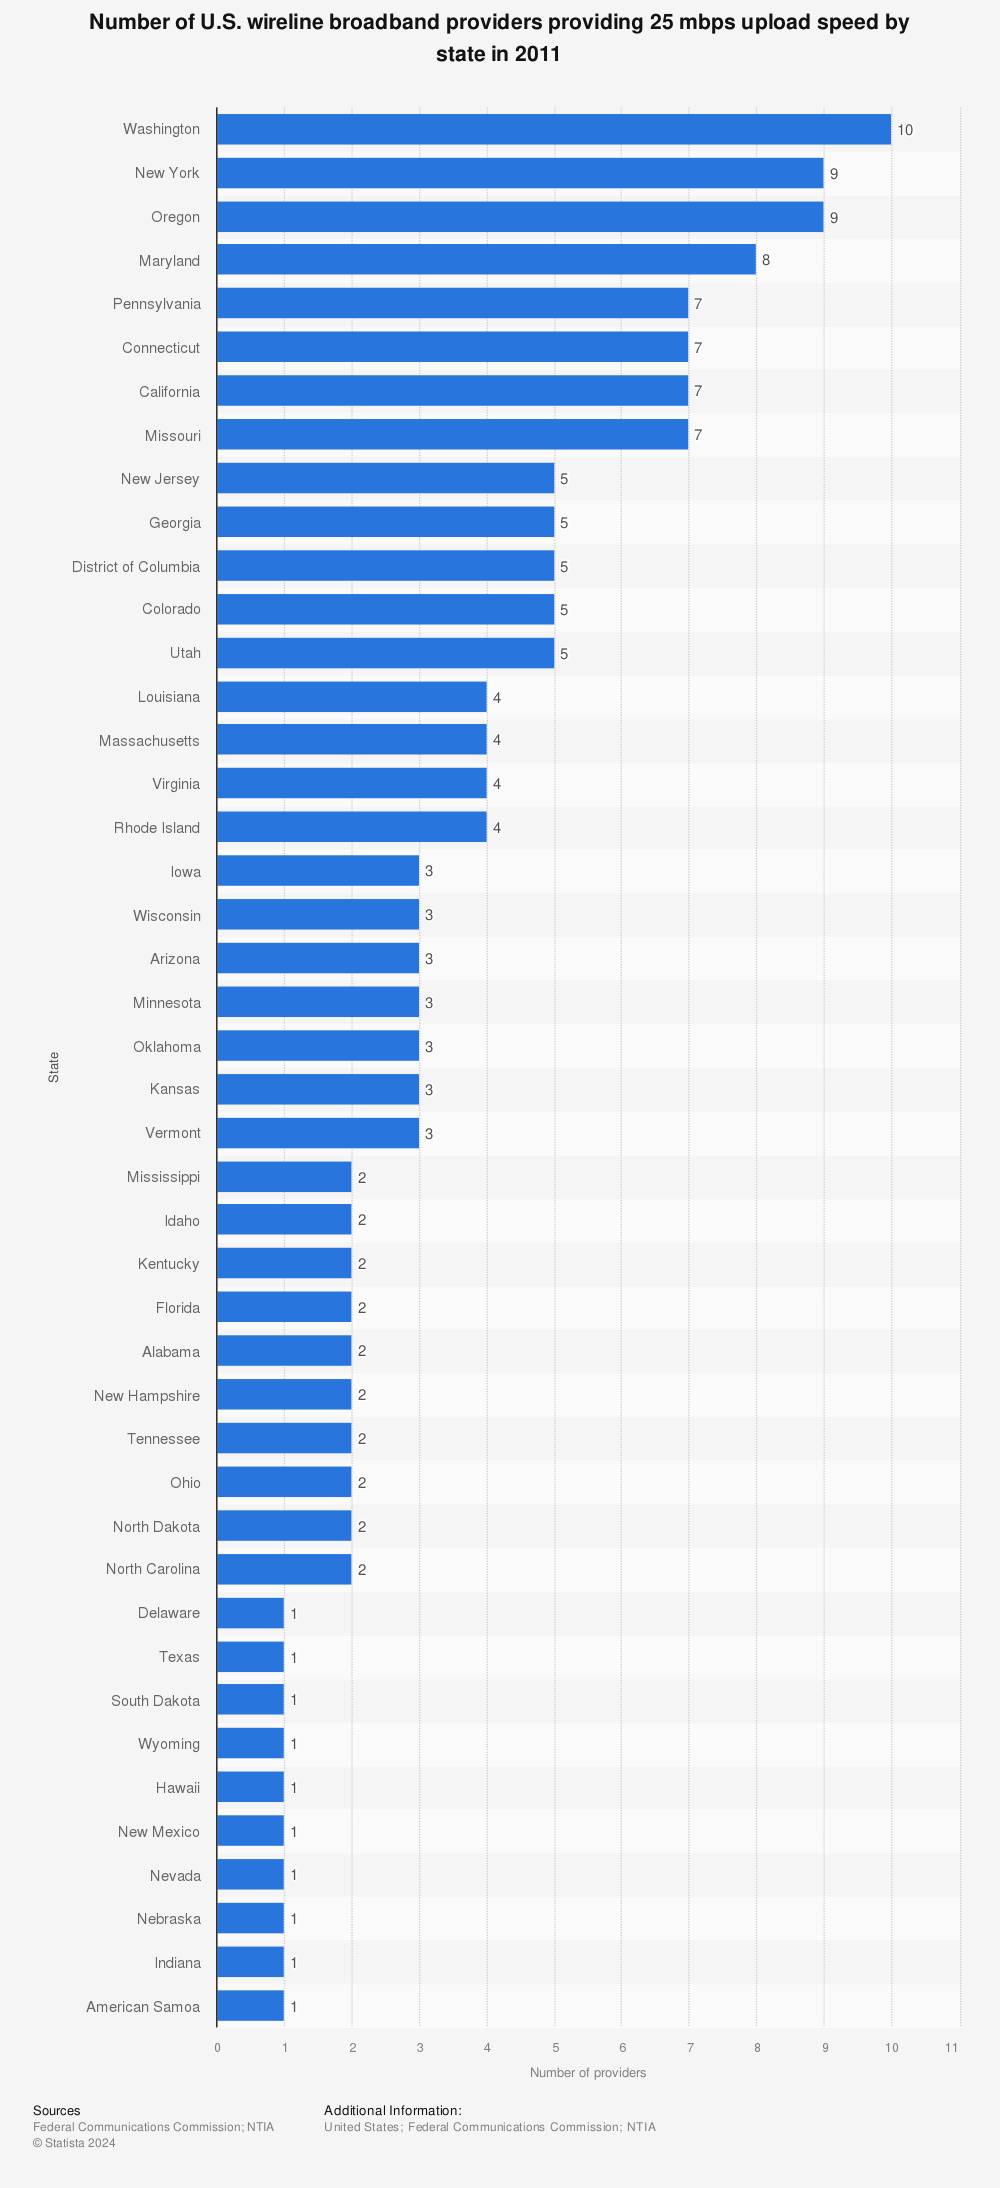 Statistic: Number of U.S. wireline broadband providers providing 25 mbps upload speed by state in 2011 | Statista